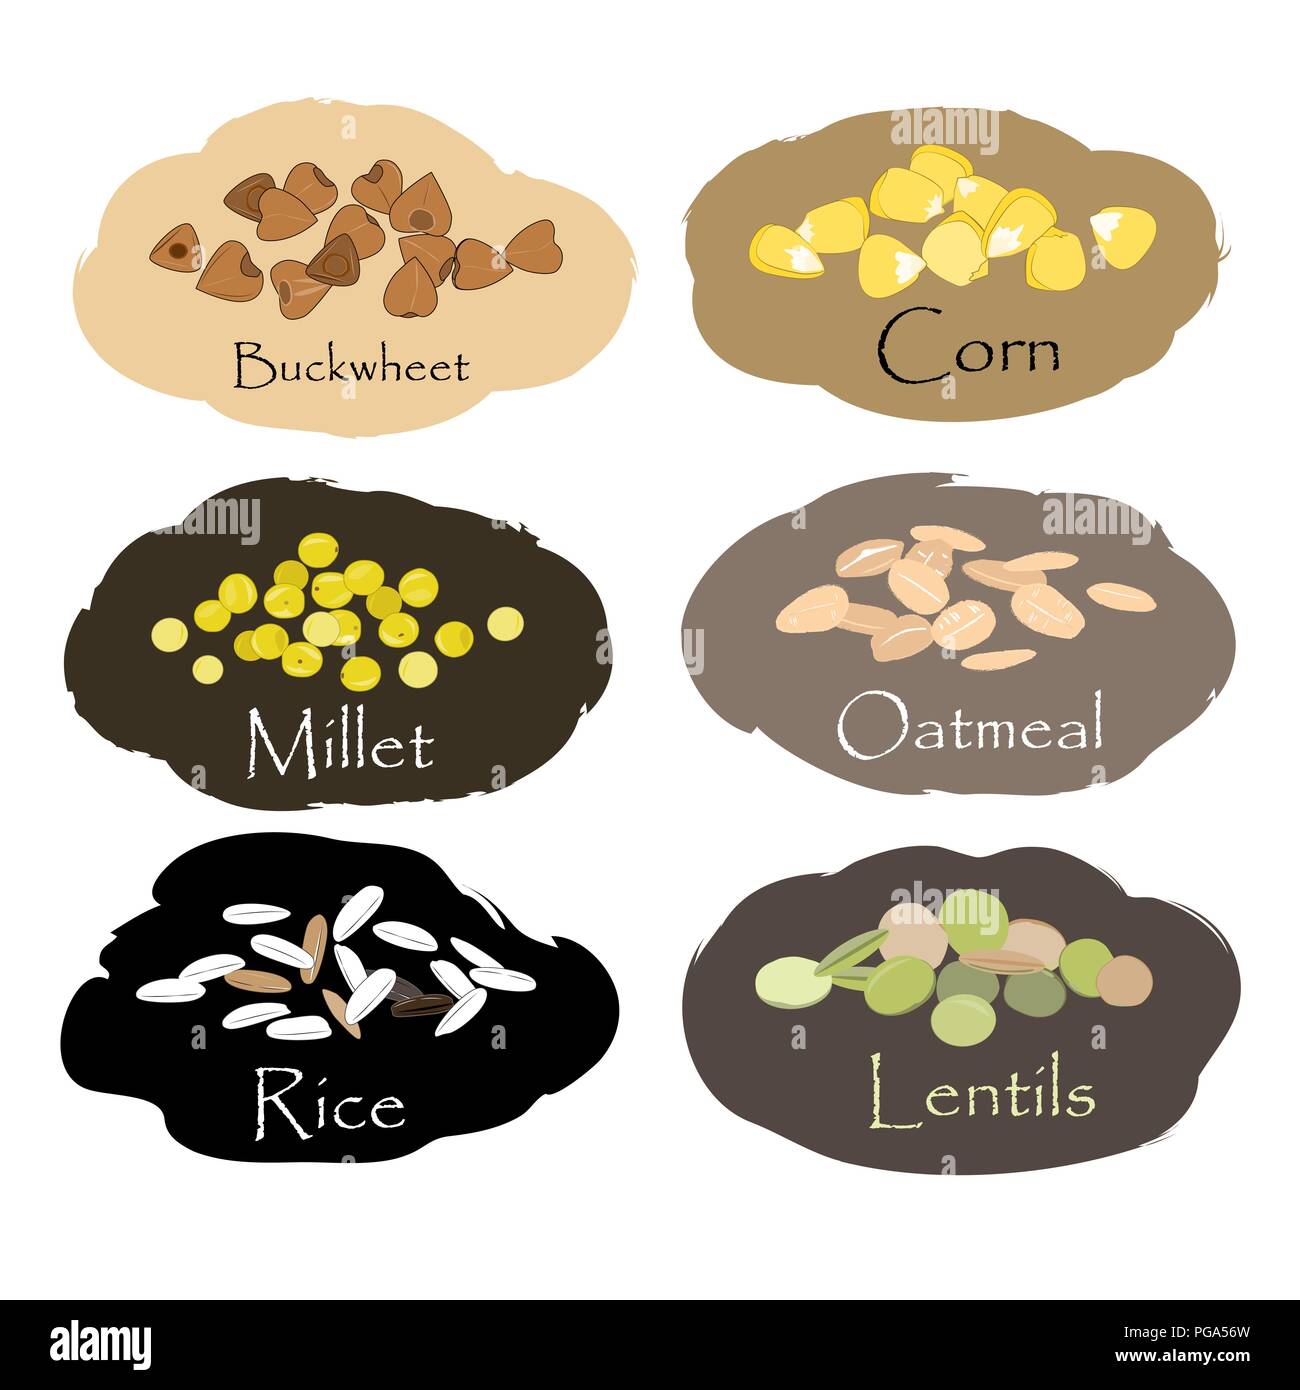 Vector set of cereal and grain emblems. For packing groats, kitchen jar prints, advertising healthy food. Buckwheet, millet, corn, rice, lentils, and Stock Vector